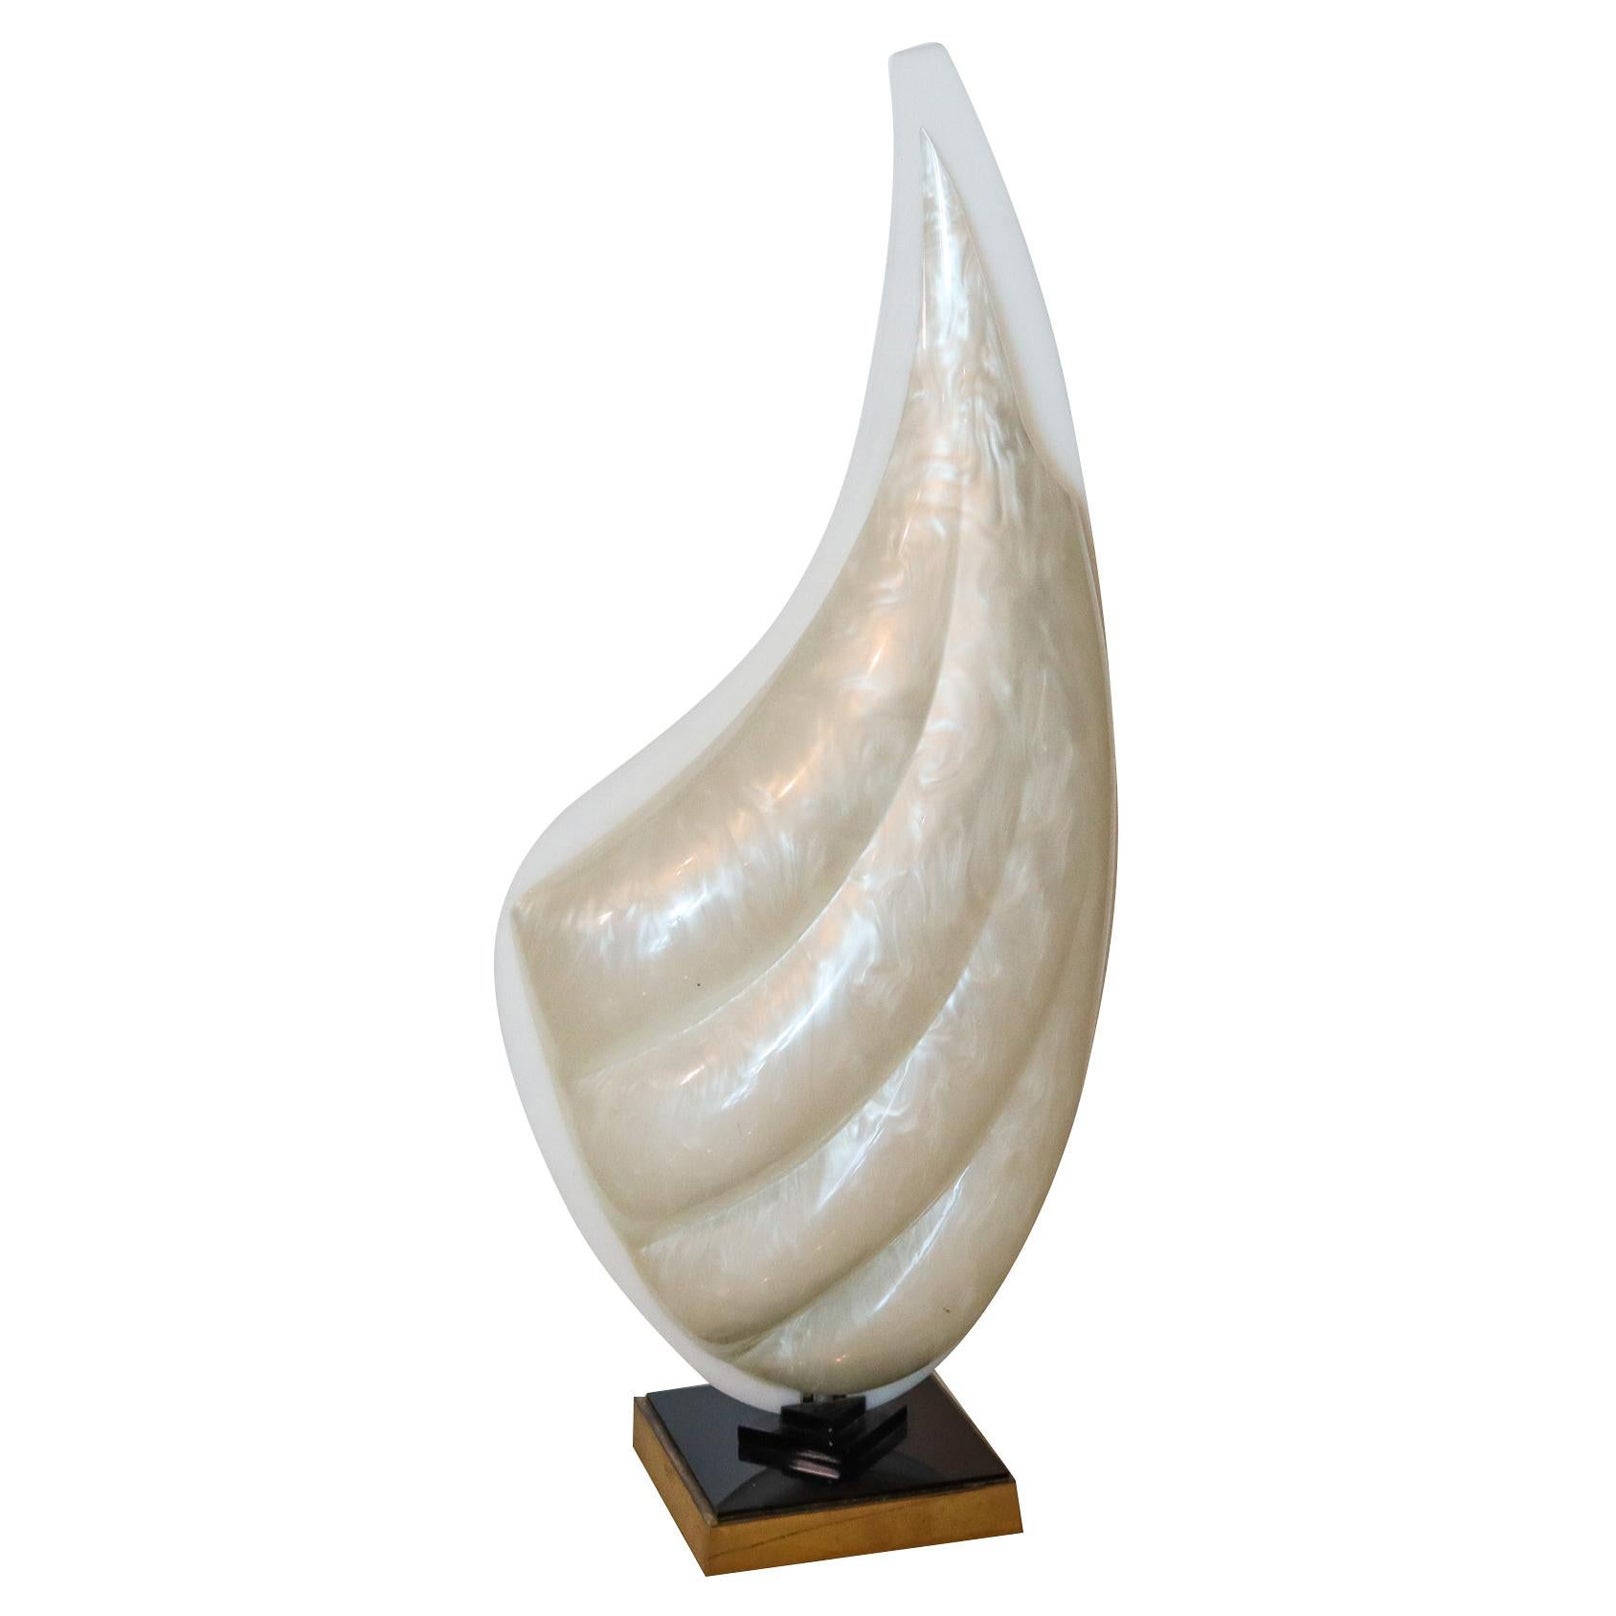 Roger Rougier 1970 Single Modernist Table Acrylic Lamp in Clam Shaped For Sale